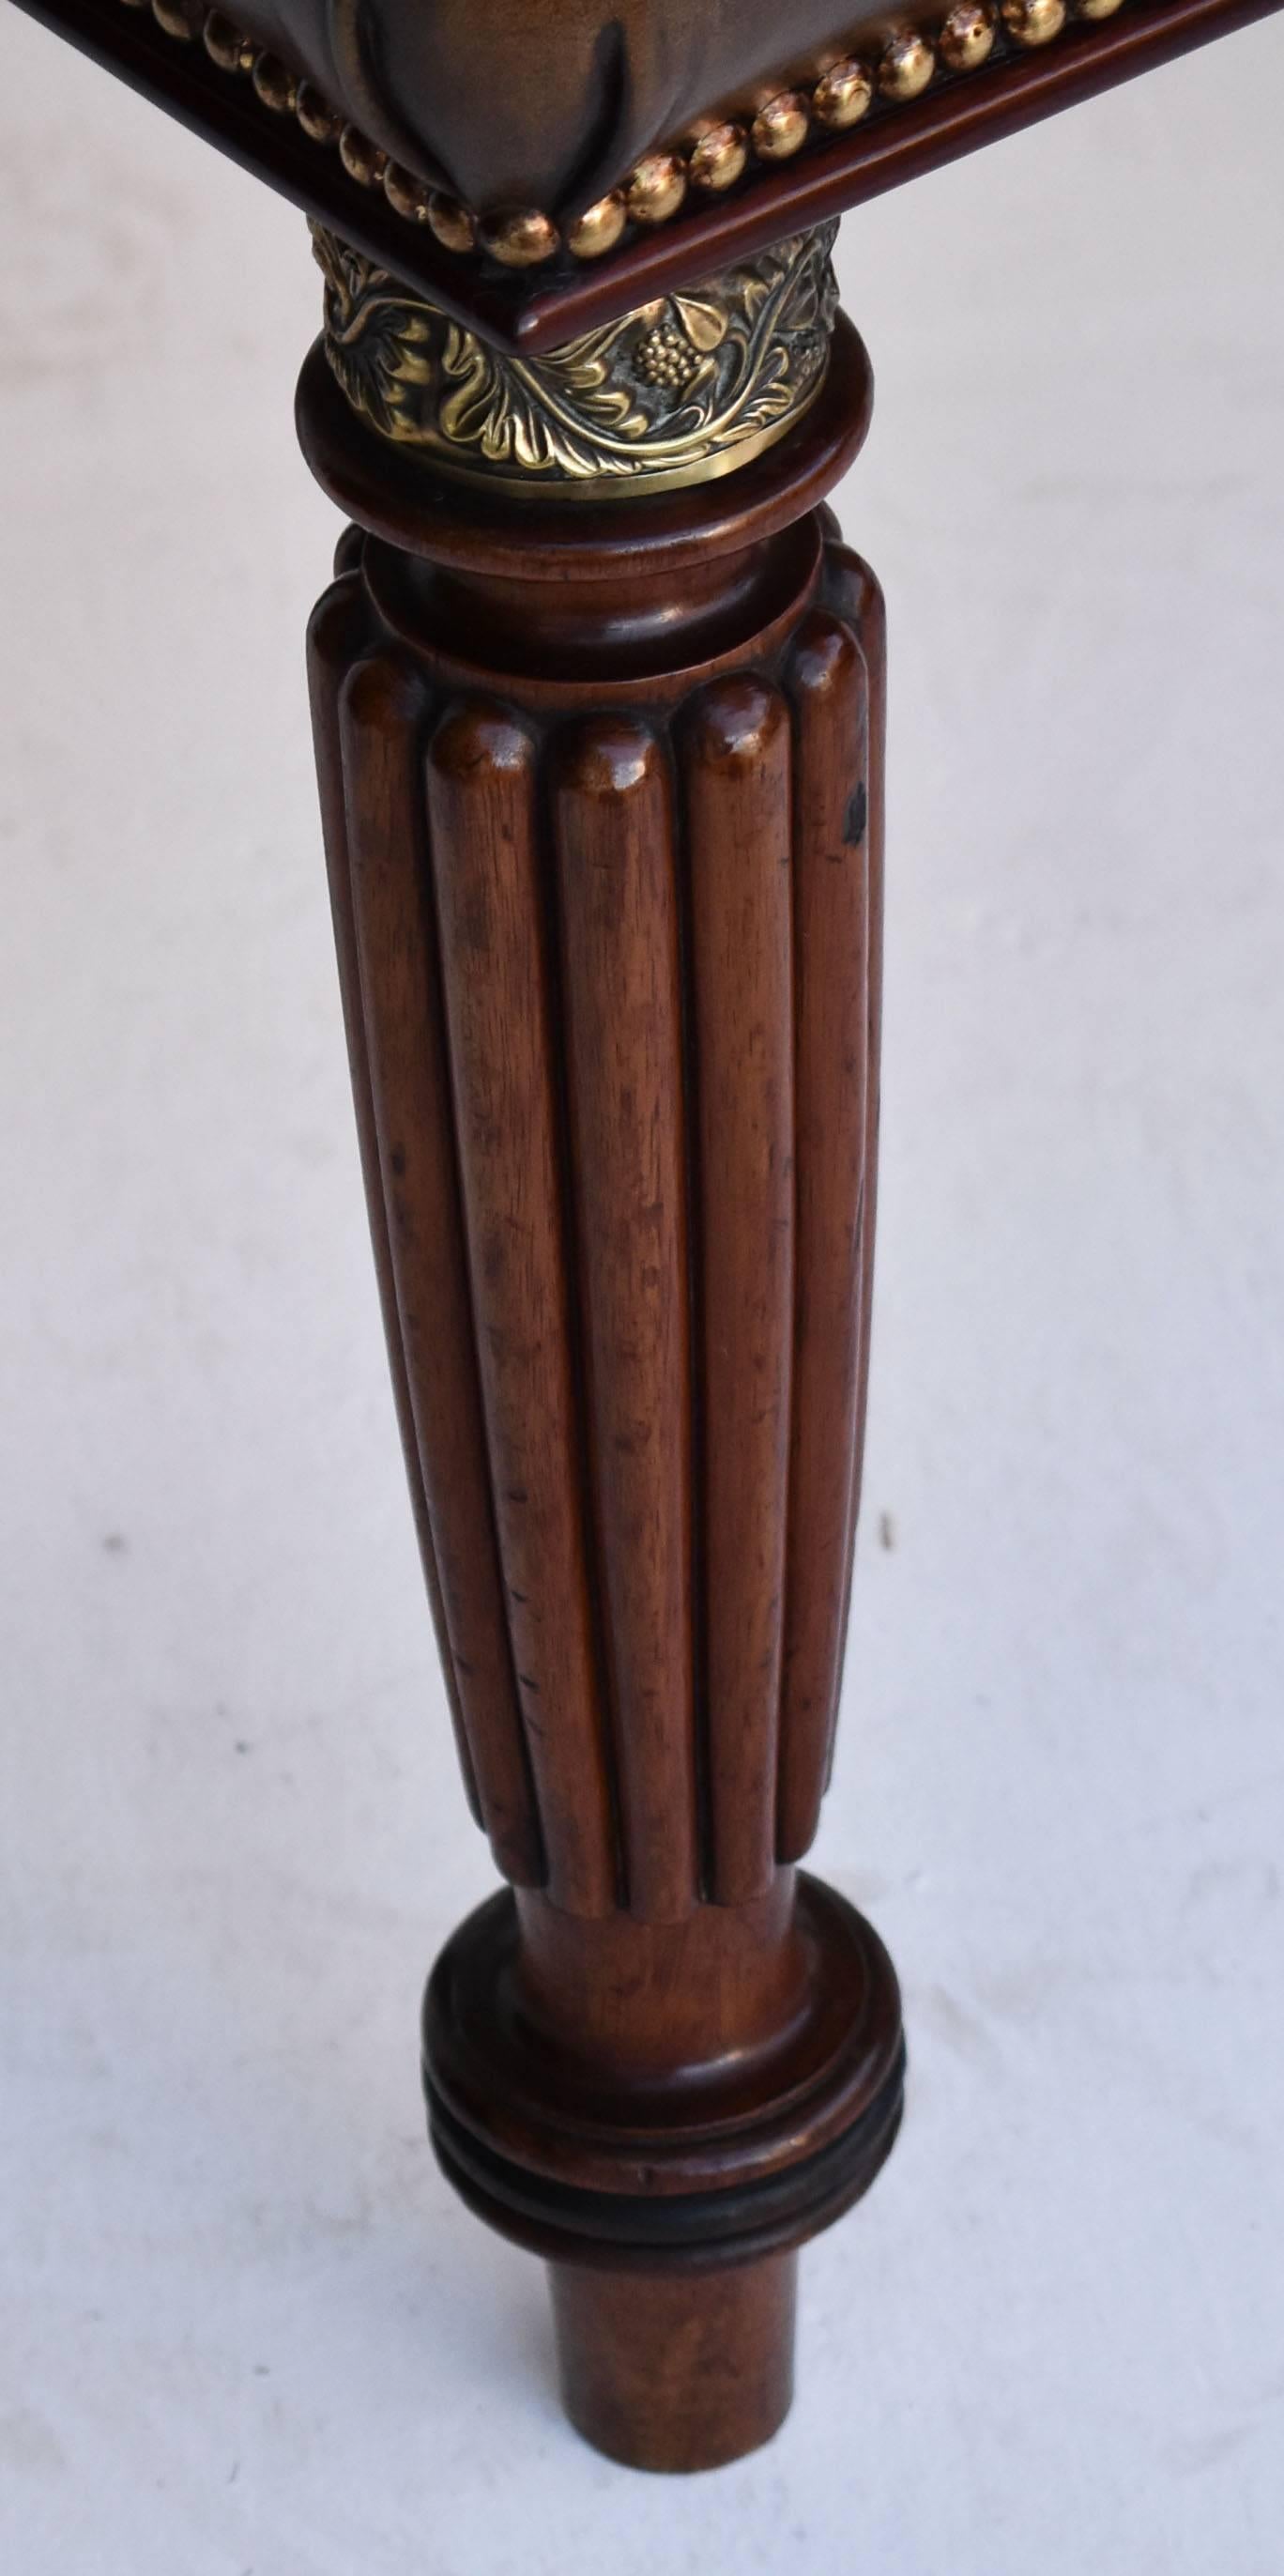 For sale is a top quality 19th century mahogany stool. With six turned and fluted legs, each with ornate brass surrounds to the top. This is below a deep buttoned leather seat. The legs, the frame and the upholstery of the stool are in an excellent,